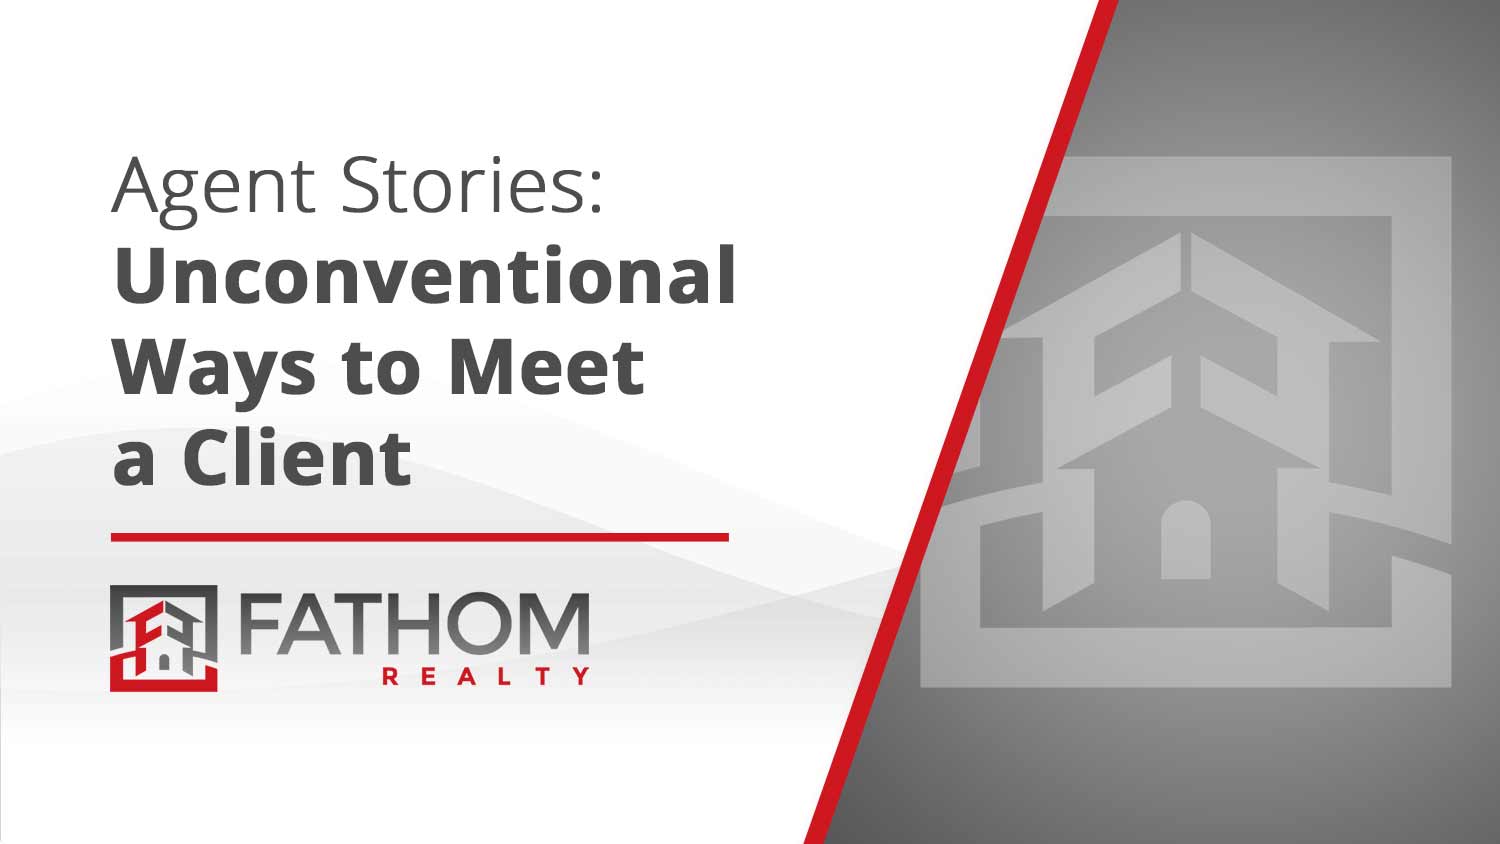 Featured image for “Agent Stories: Unconventional Ways to Meet a Client”